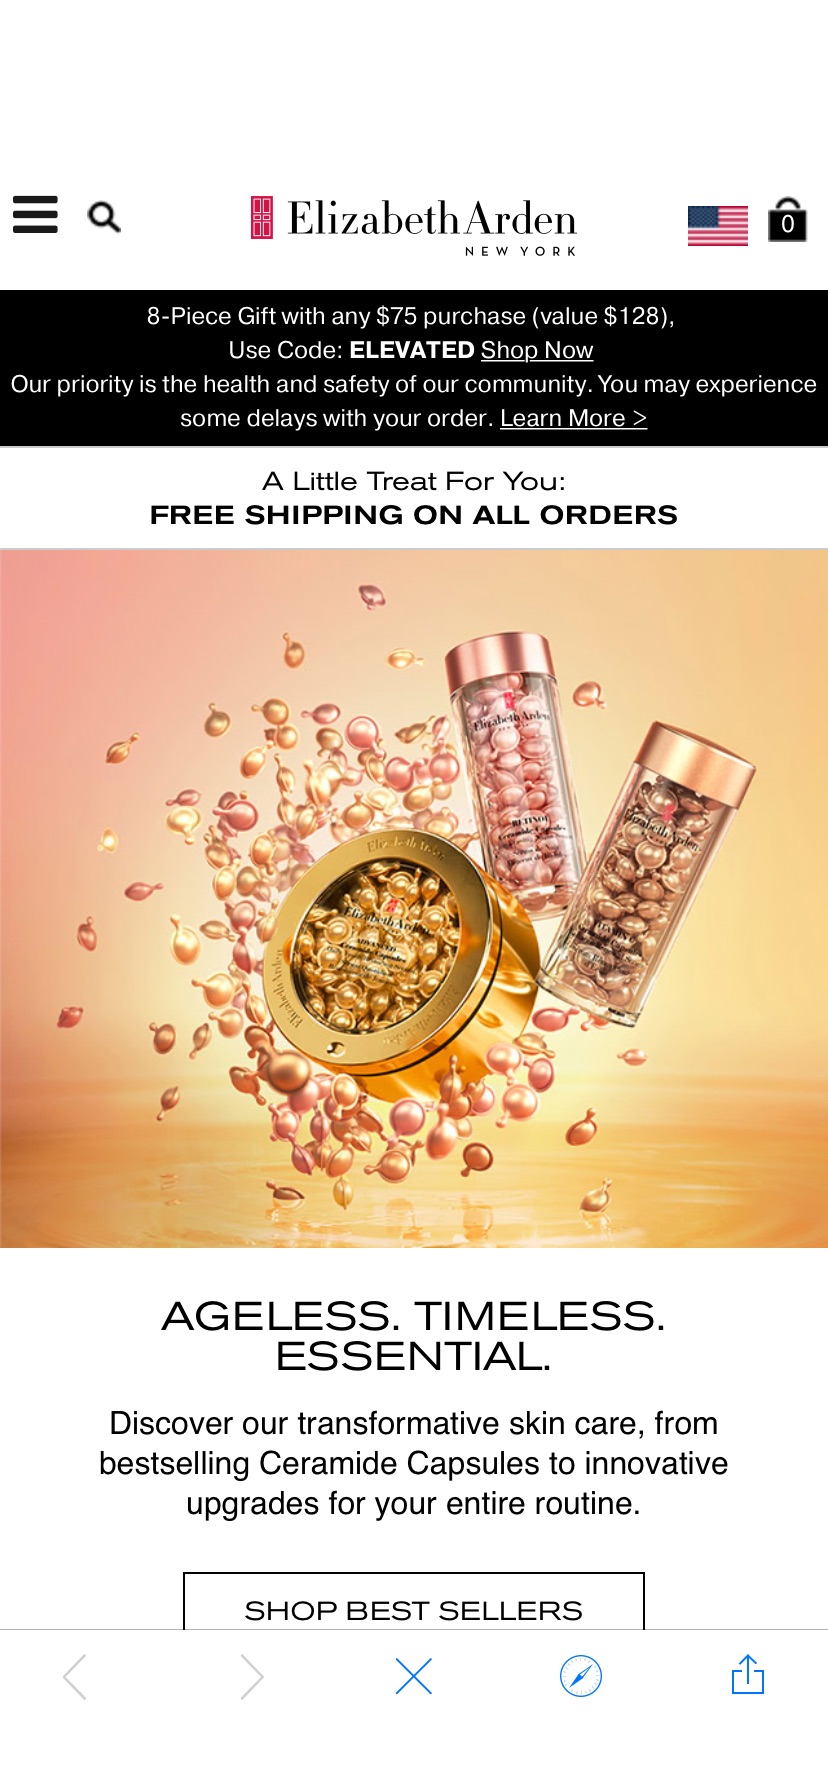 Elizabeth Arden Makeup, Skincare, Perfume & Gifts | Official Site雅顿